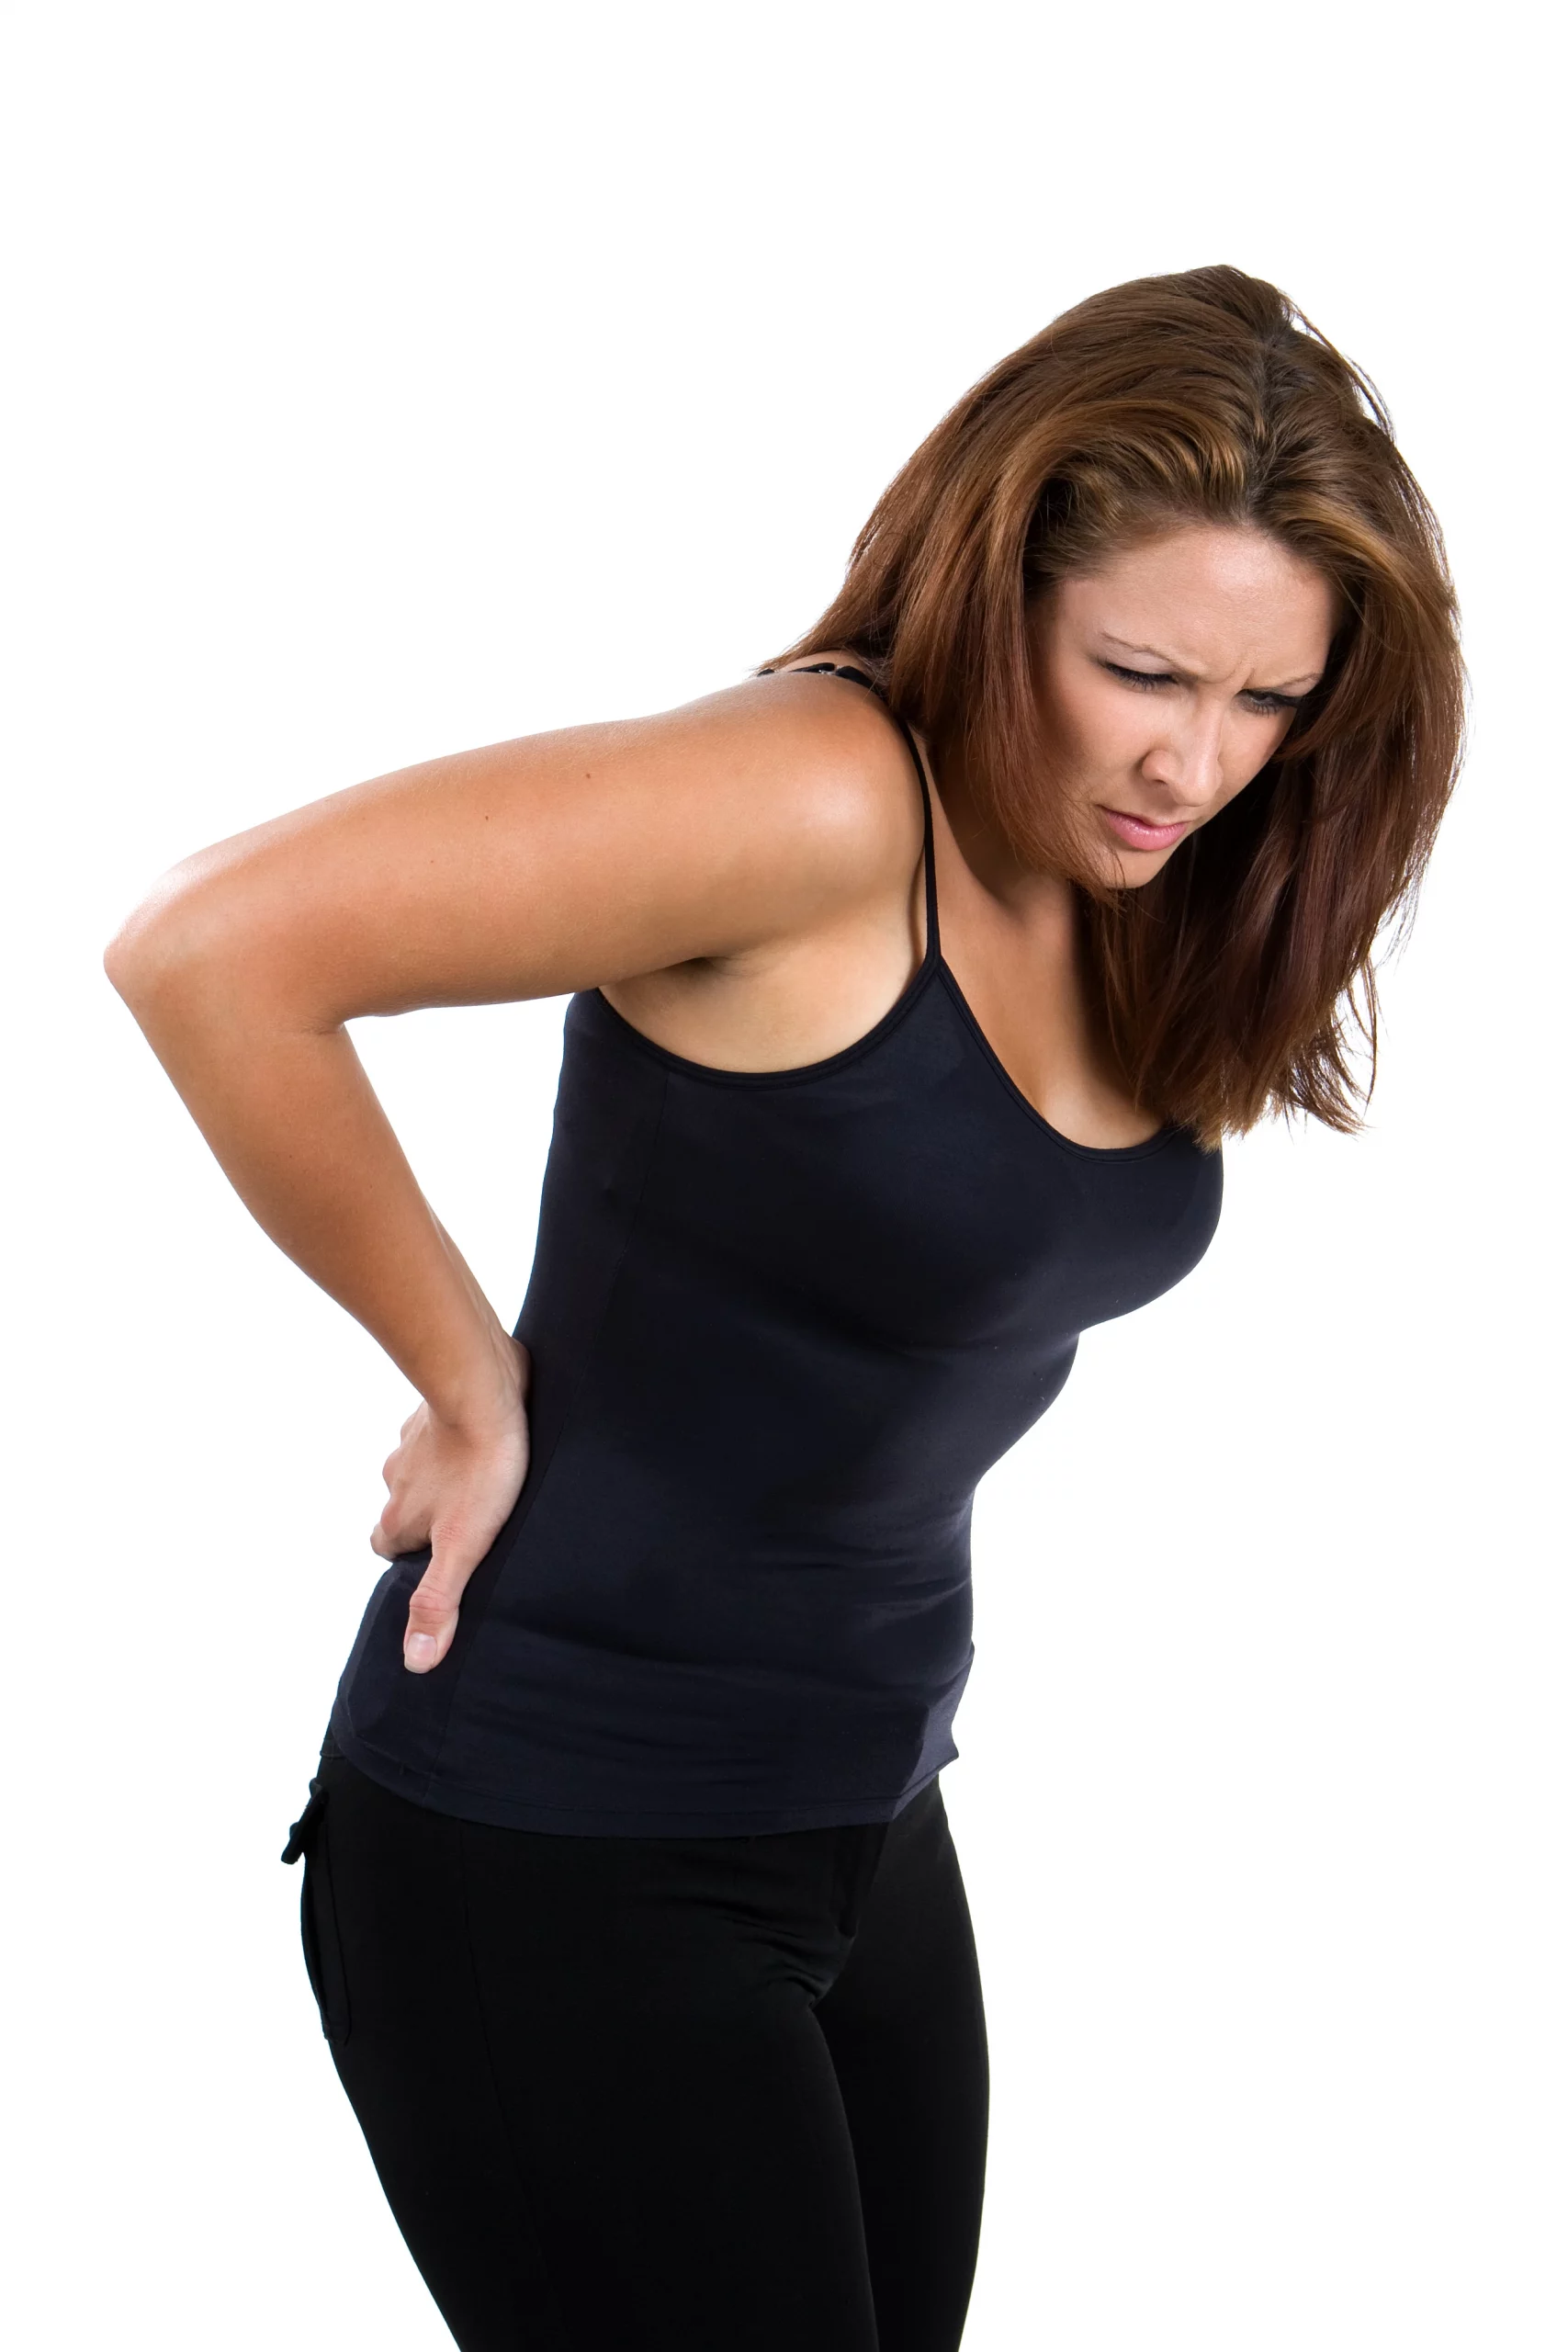 Back Pain After A Colorado Springs Car Accident